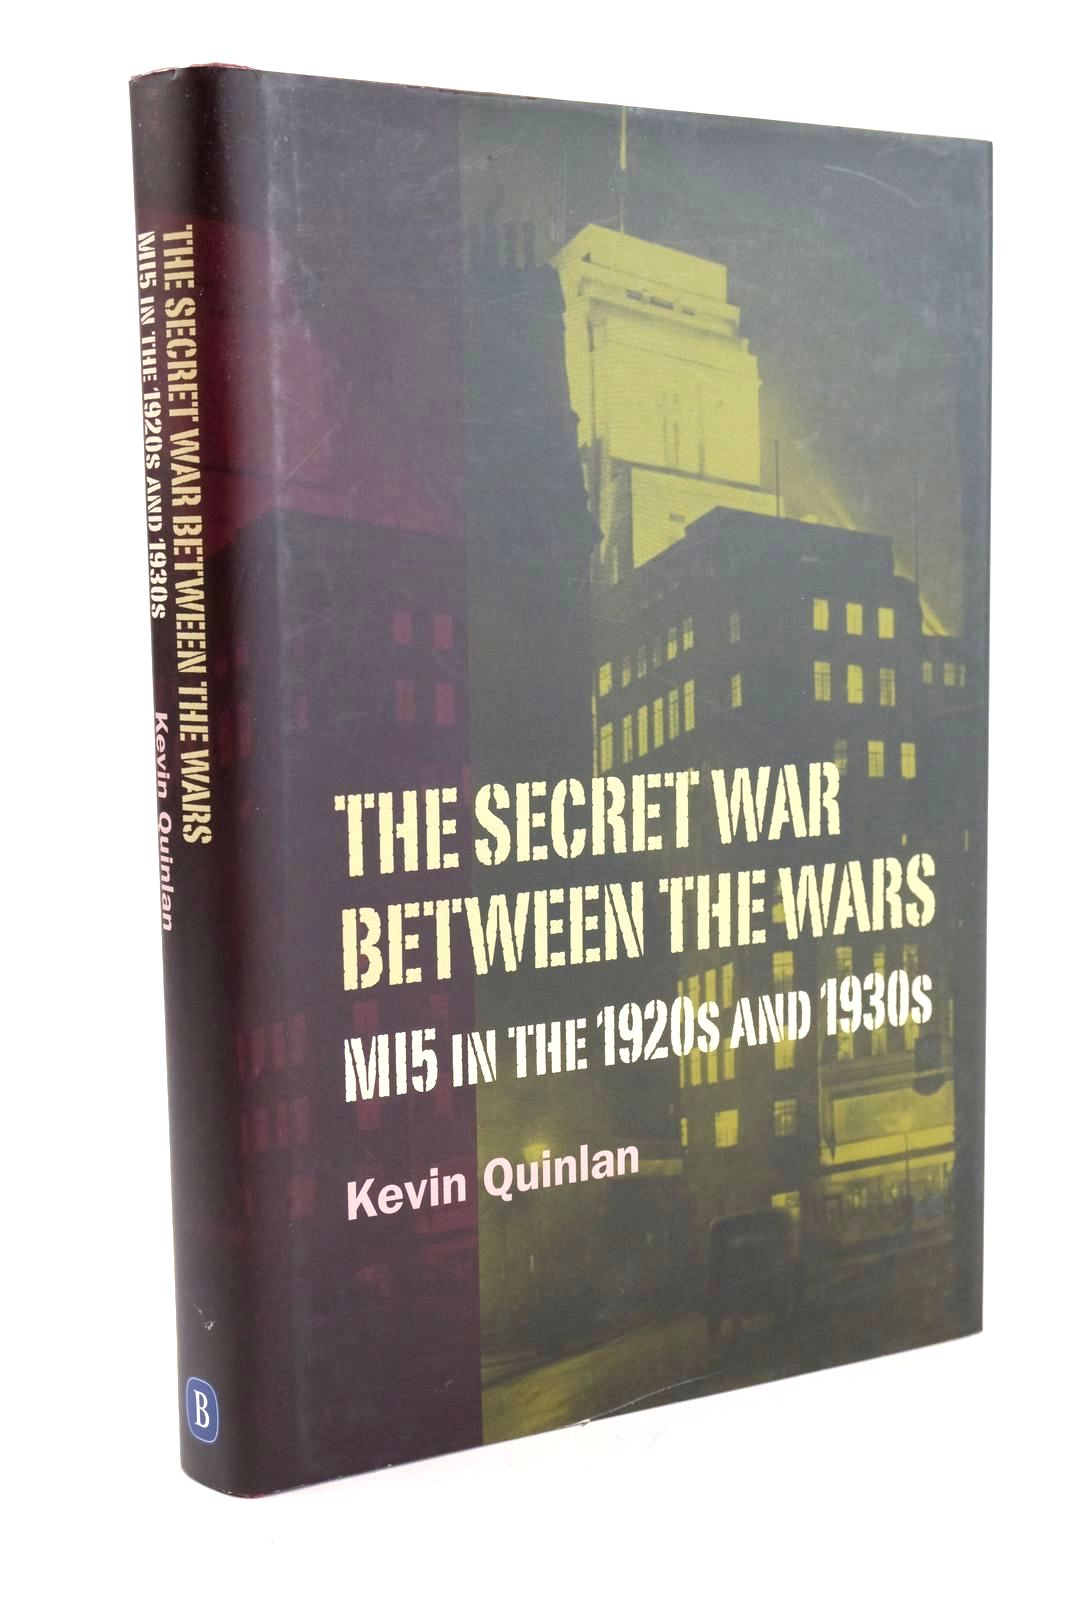 Photo of THE SECRET WAR BETWEEN THE WARS MI5 IN THE 1920S AND 1930S- Stock Number: 1325192